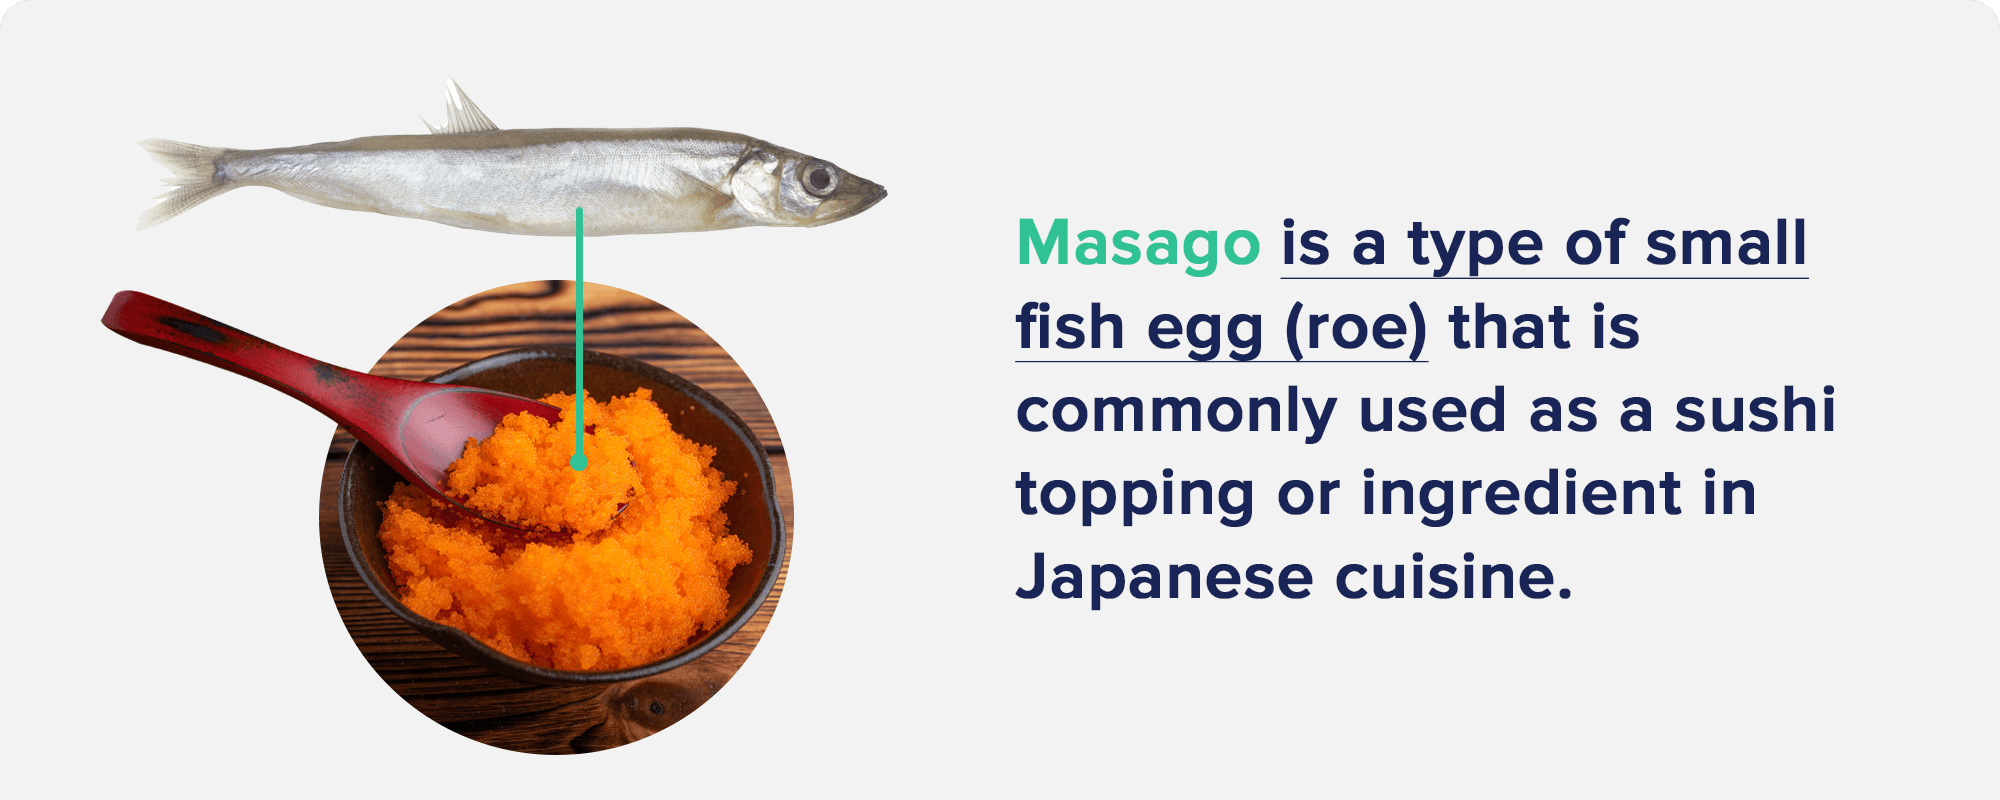 Masago is a type of small fish egg (roe)